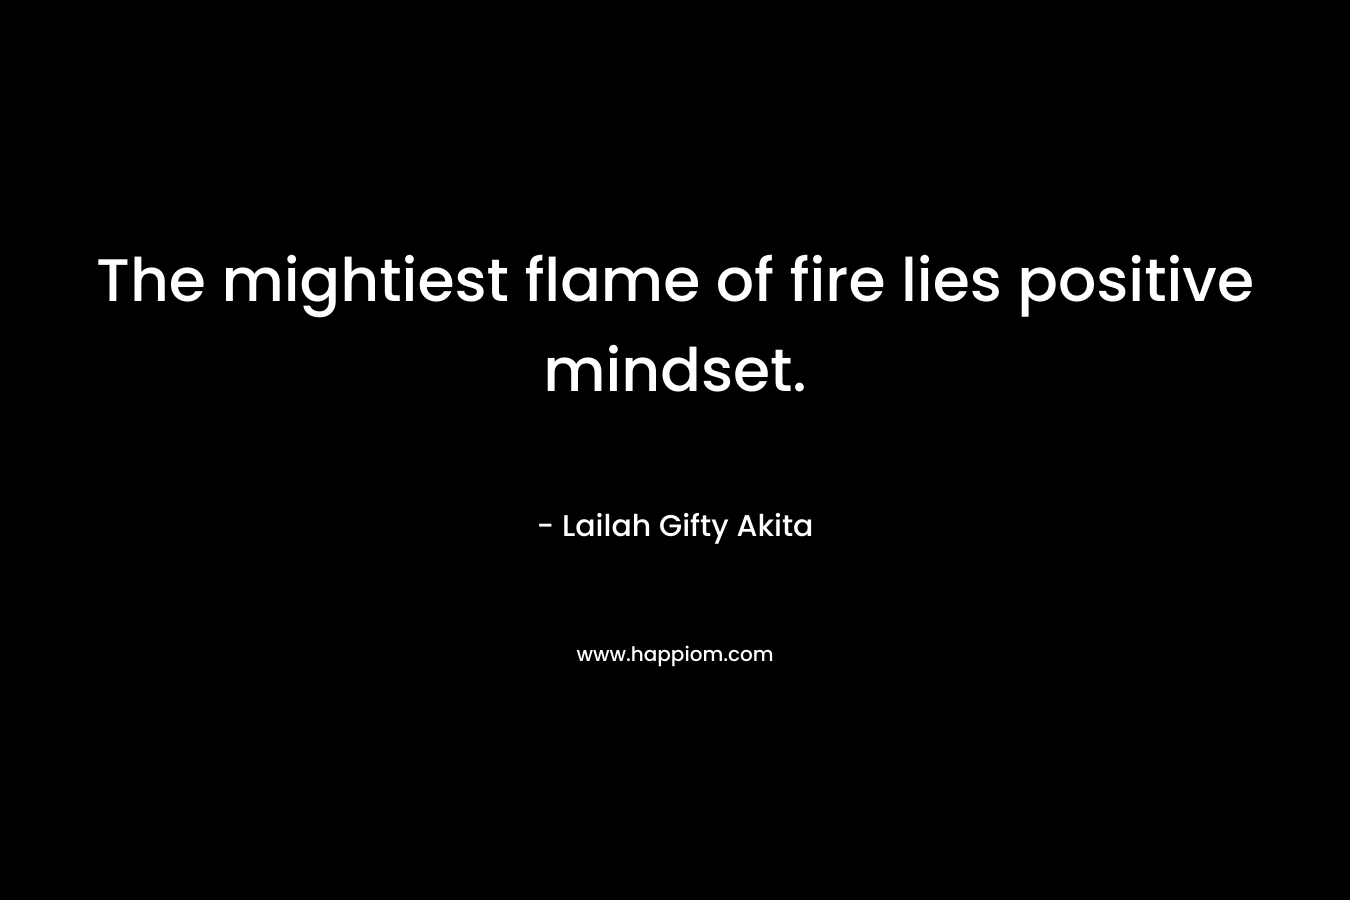 The mightiest flame of fire lies positive mindset.